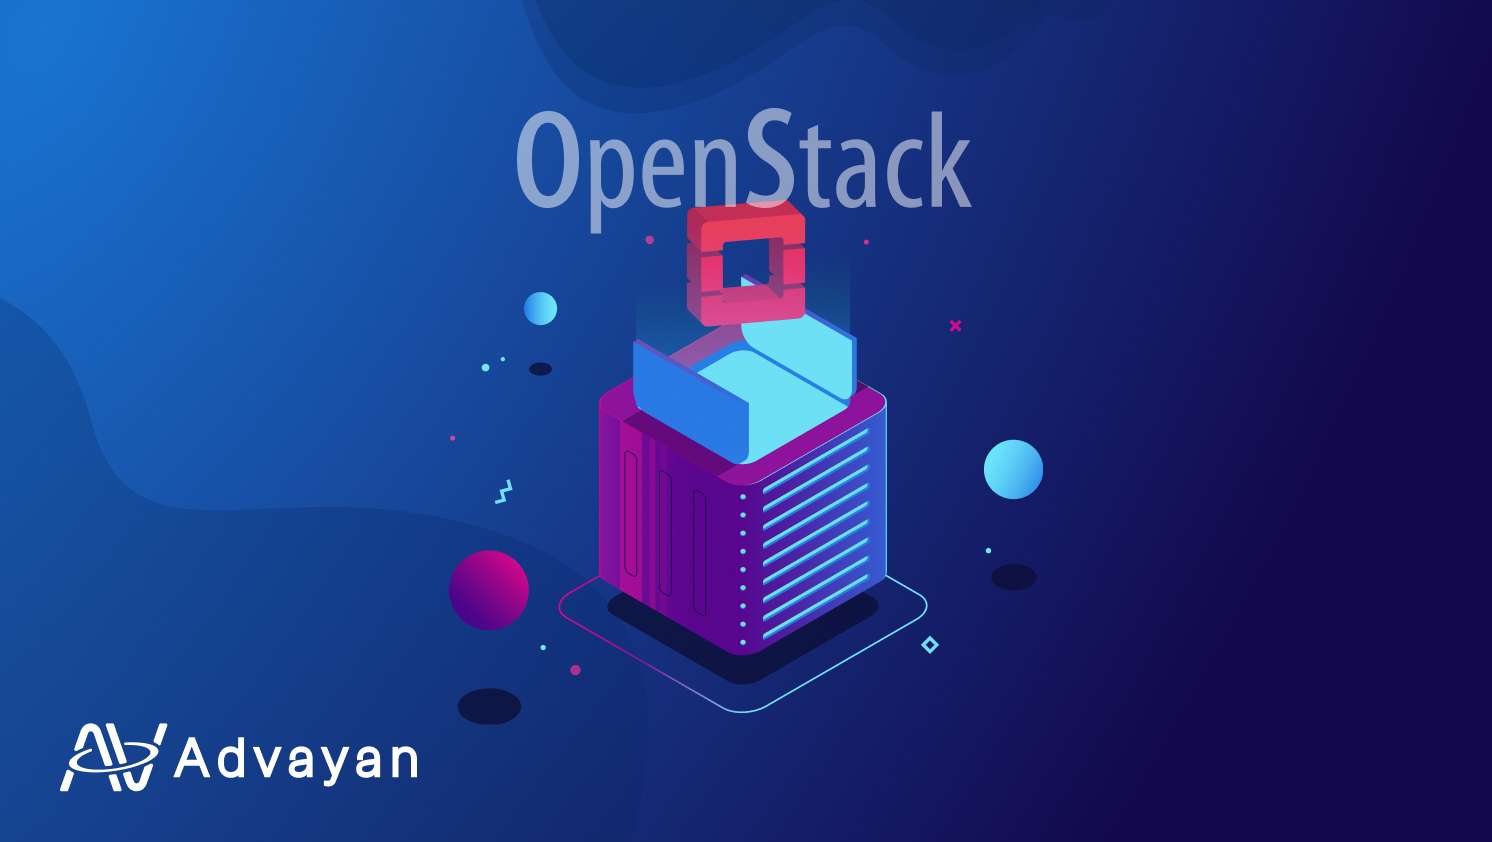 What is Openstack